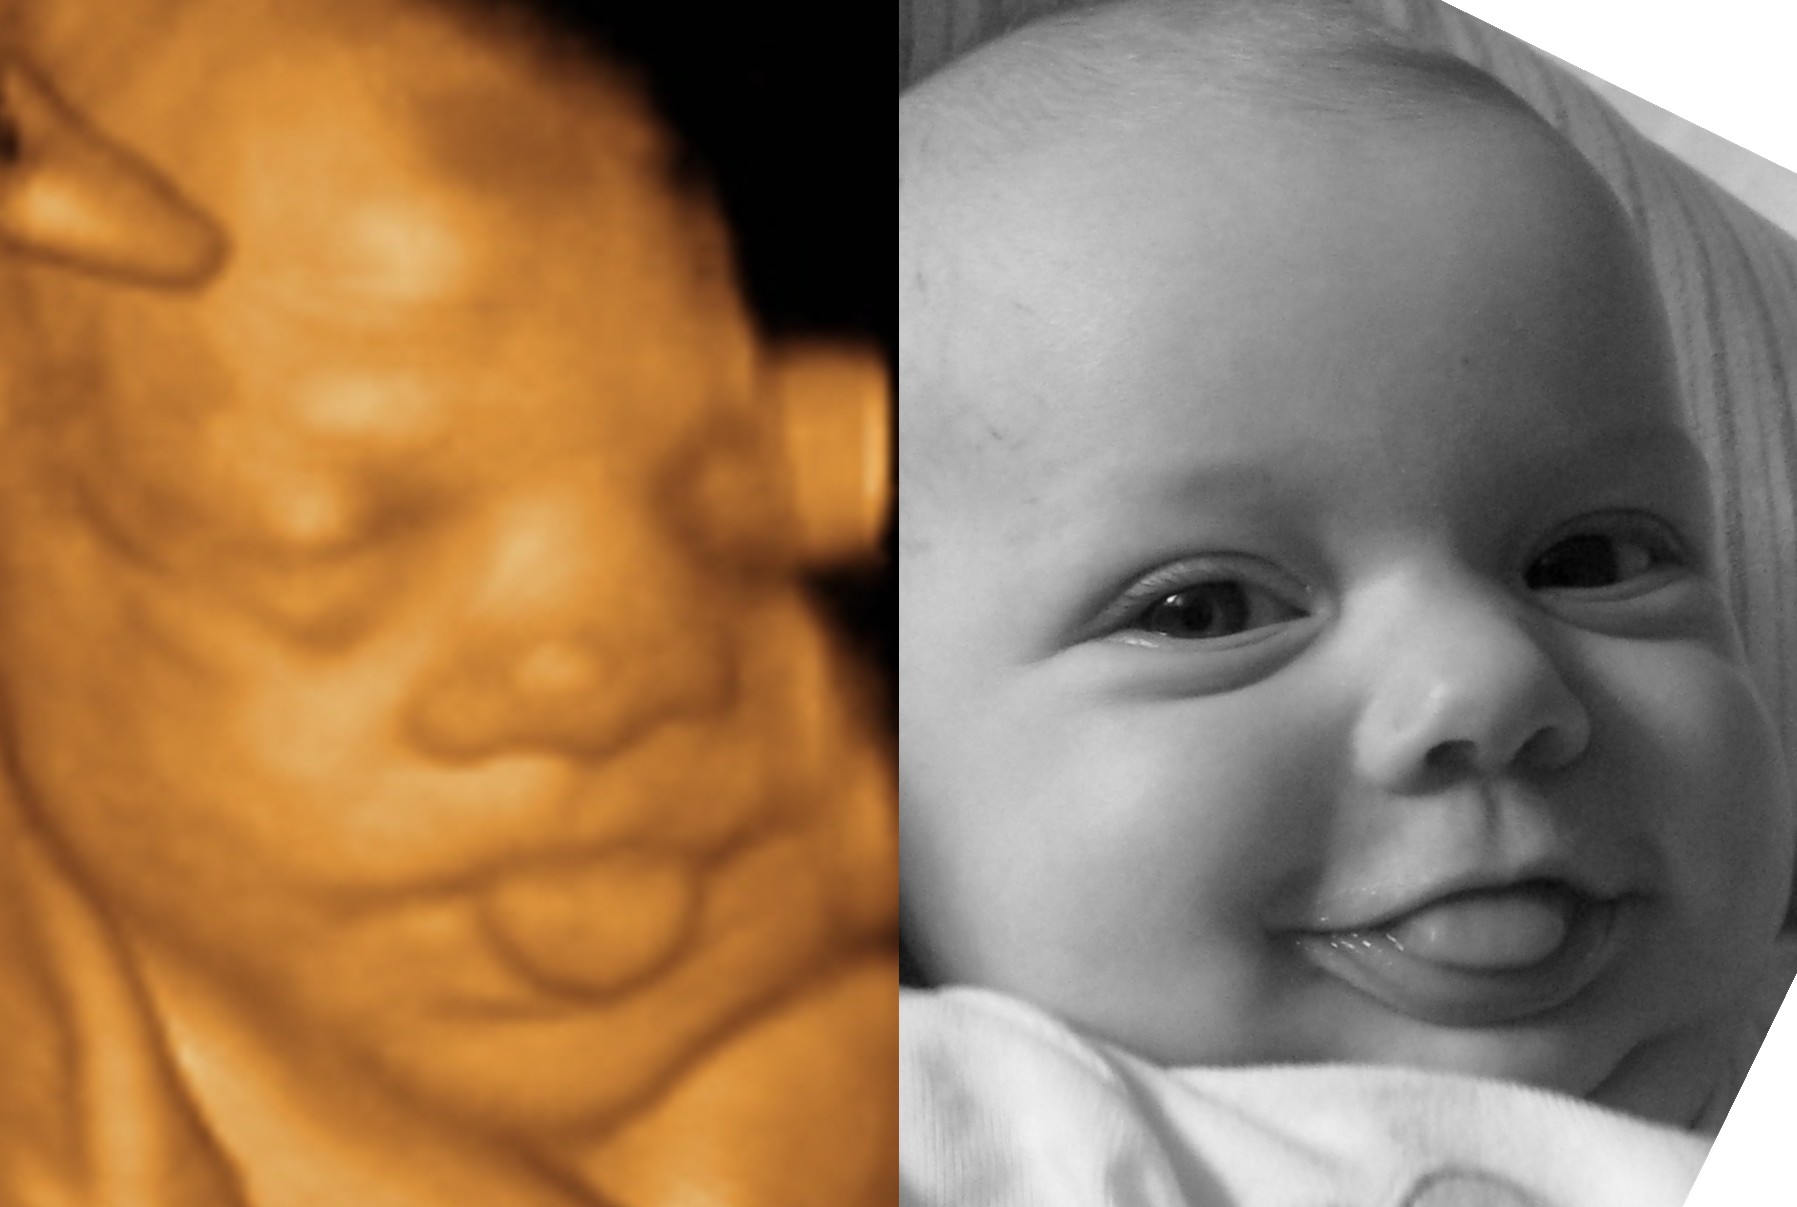 3d vs 4d ultrasound difference